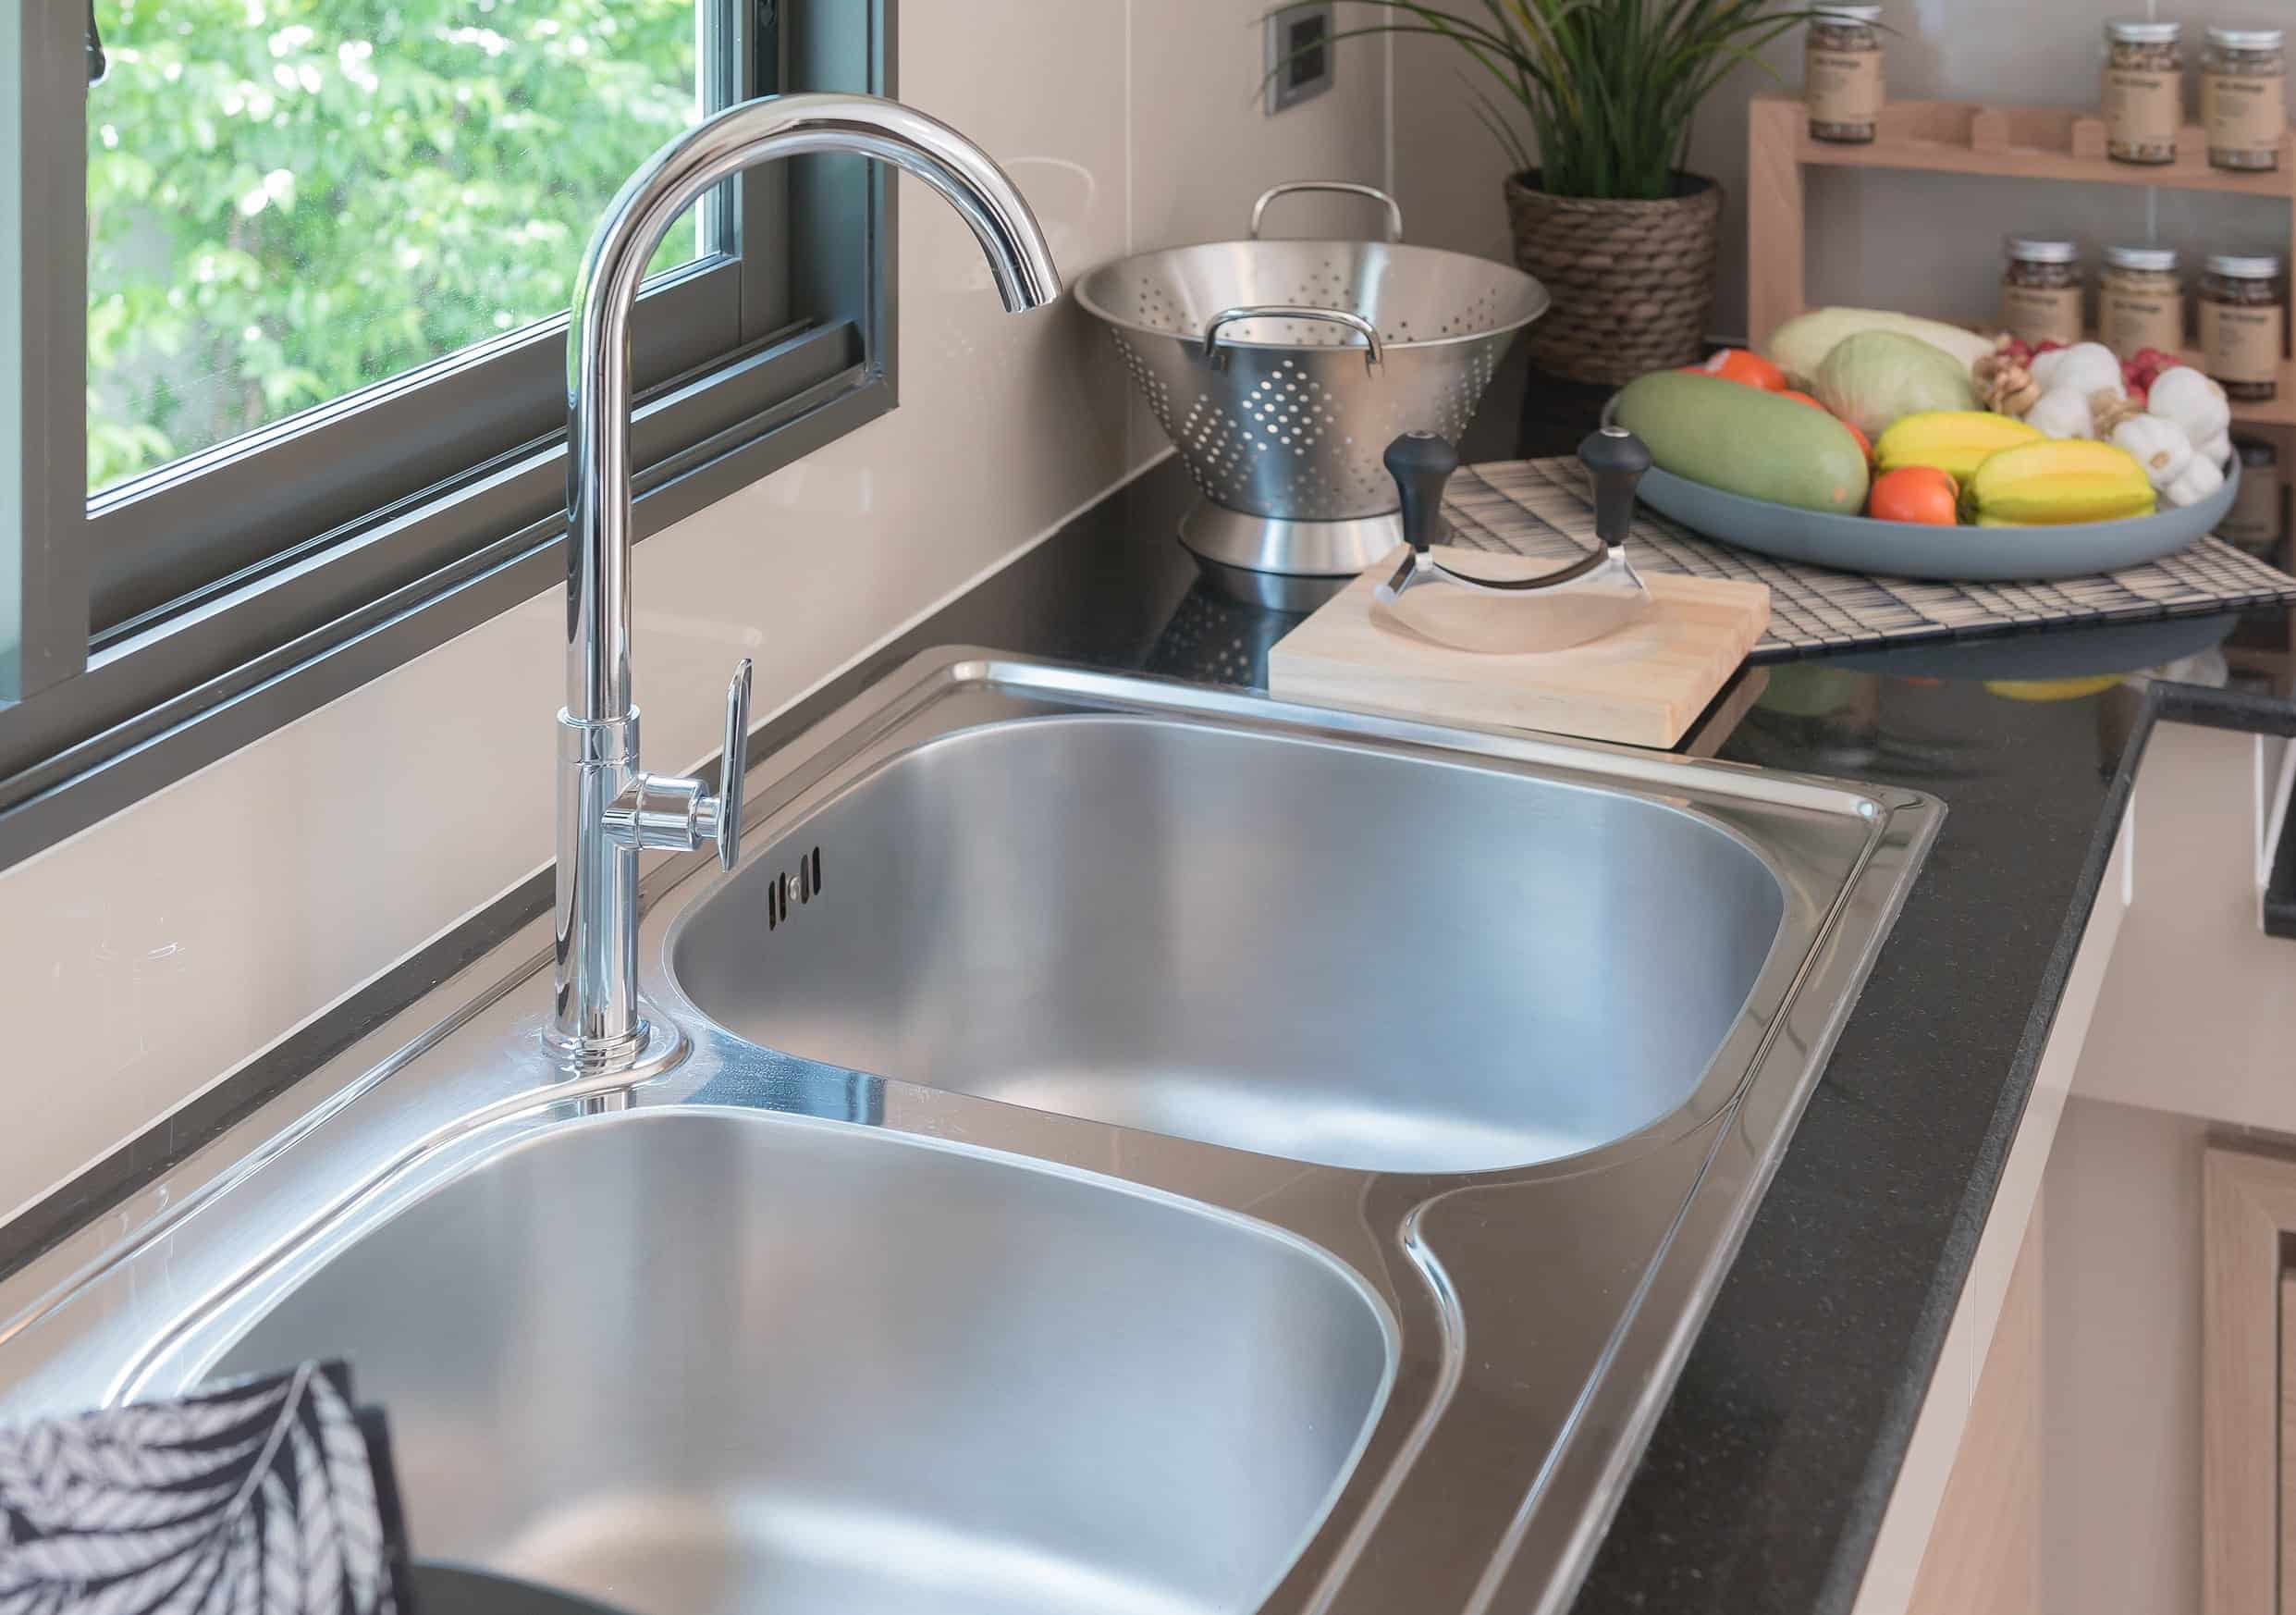 How to Organize Under Your Bathroom and Kitchen Sink